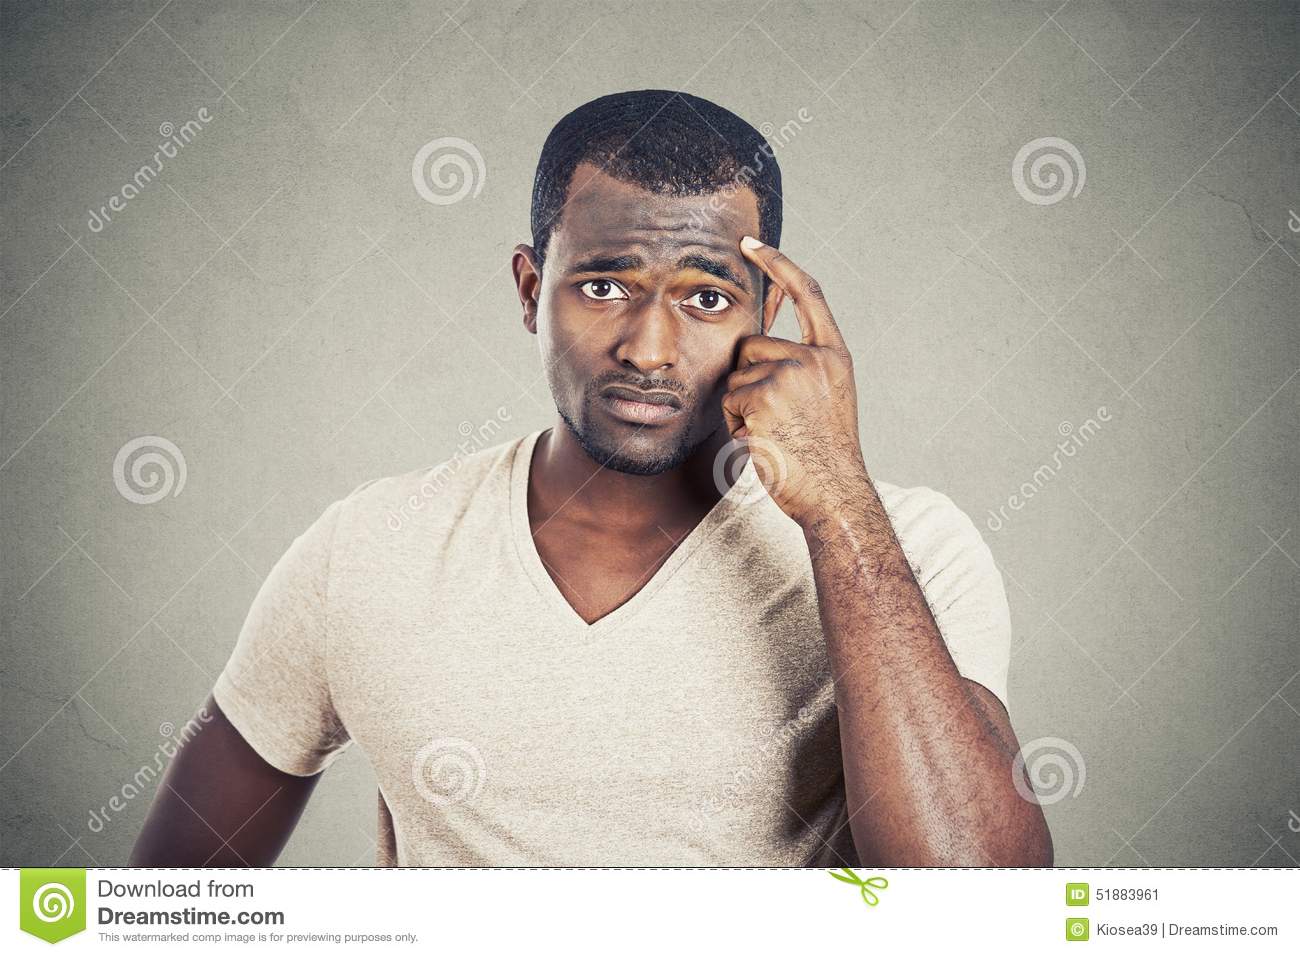 preoccupied-man-scratching-his-head-looking-solution-portrait-51883961.jpg